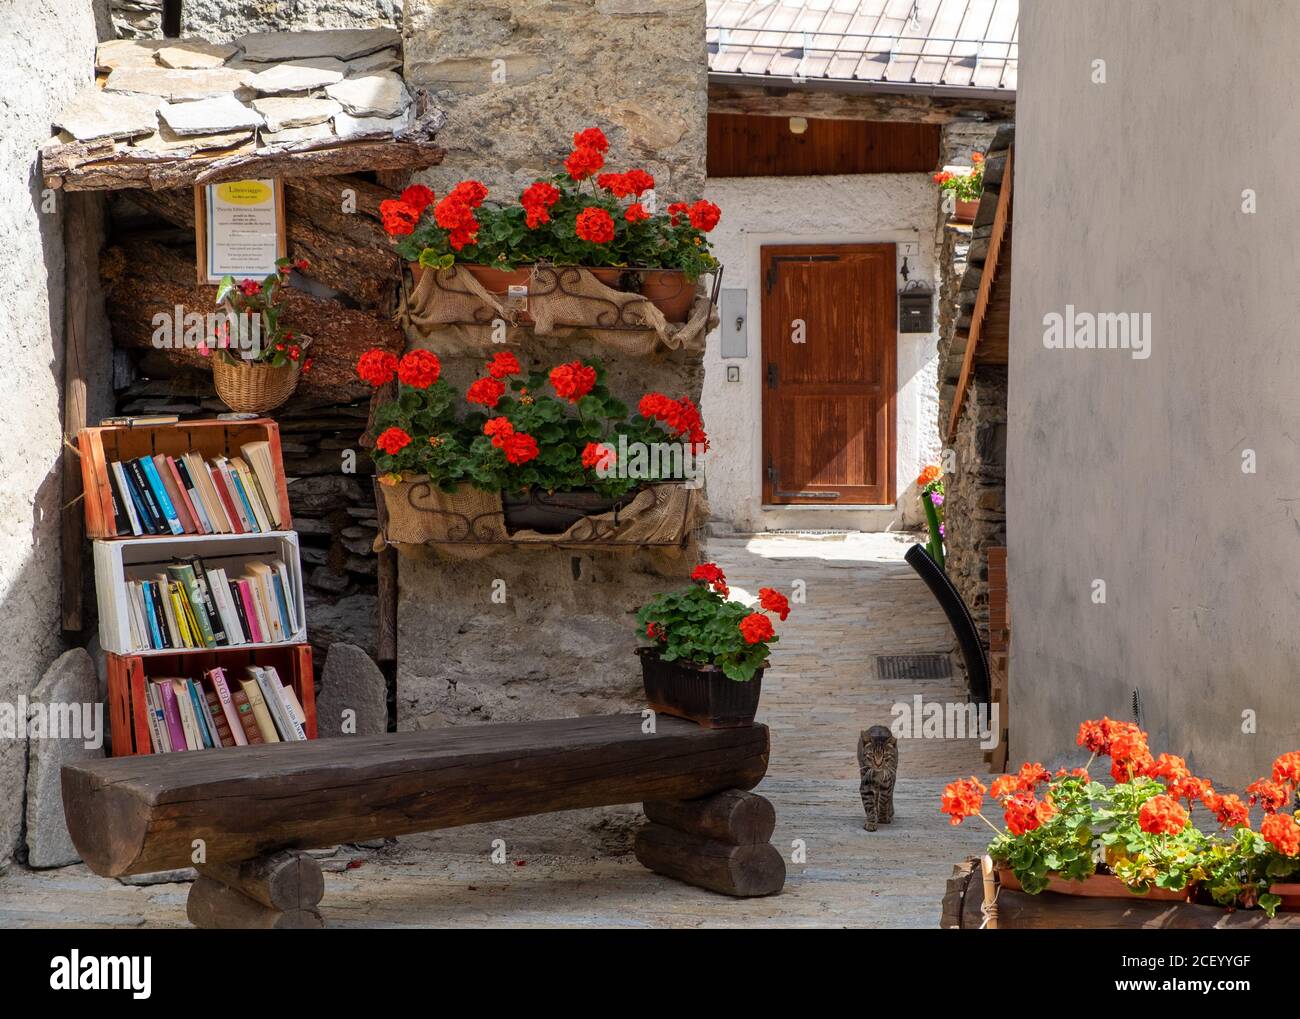 Free book sharing and geranium planters in the small village of Usseaux, Piemonte,Italy Stock Photo